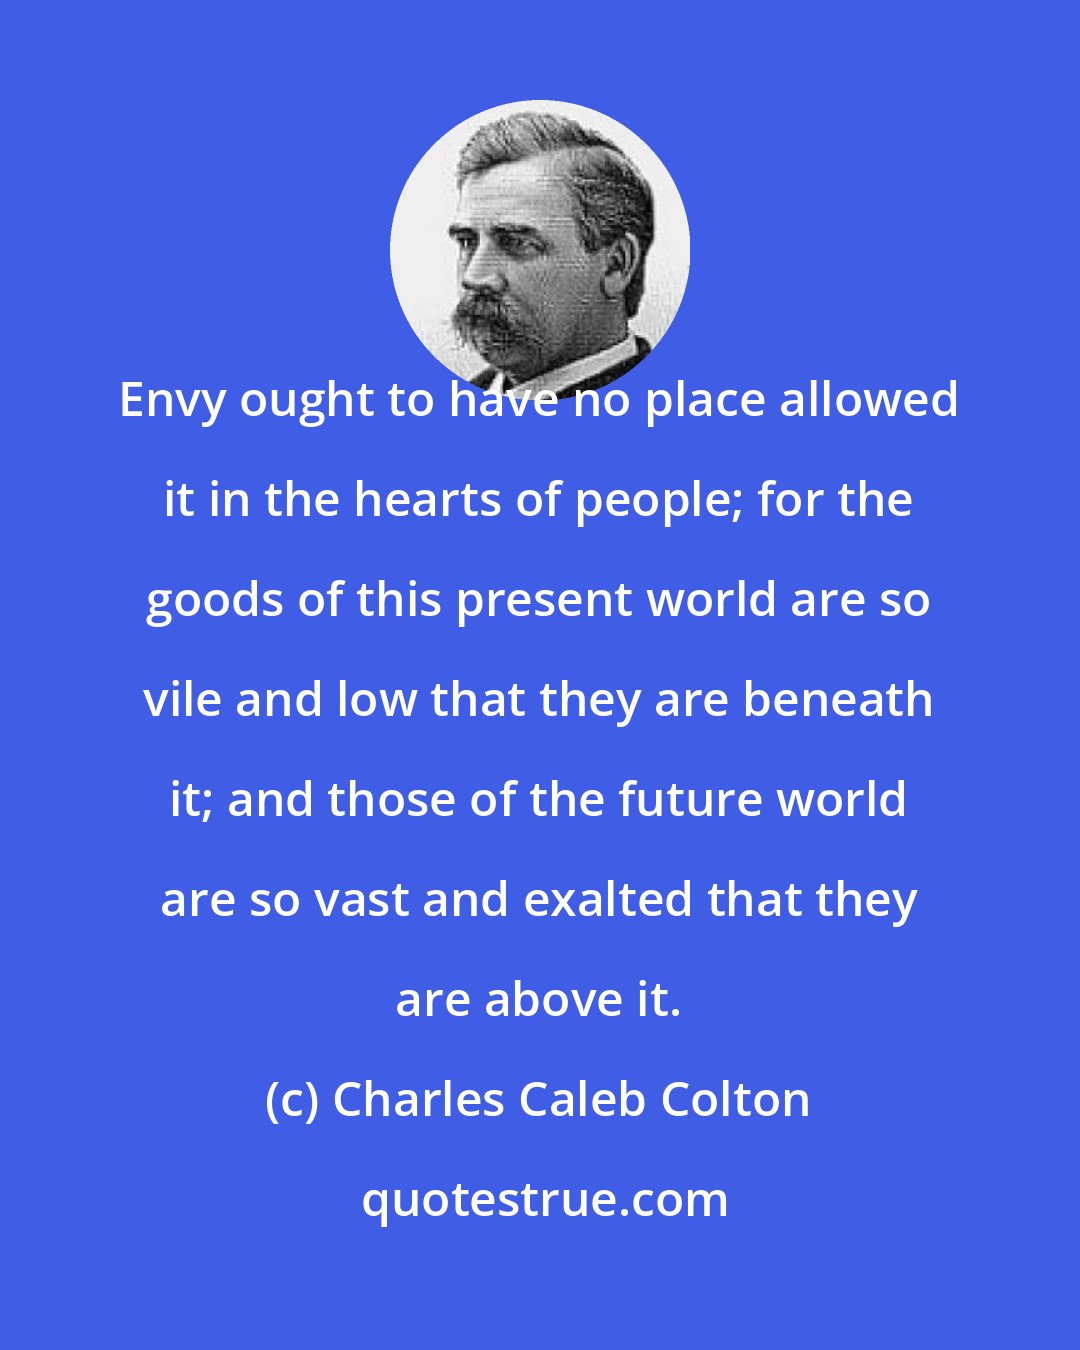 Charles Caleb Colton: Envy ought to have no place allowed it in the hearts of people; for the goods of this present world are so vile and low that they are beneath it; and those of the future world are so vast and exalted that they are above it.